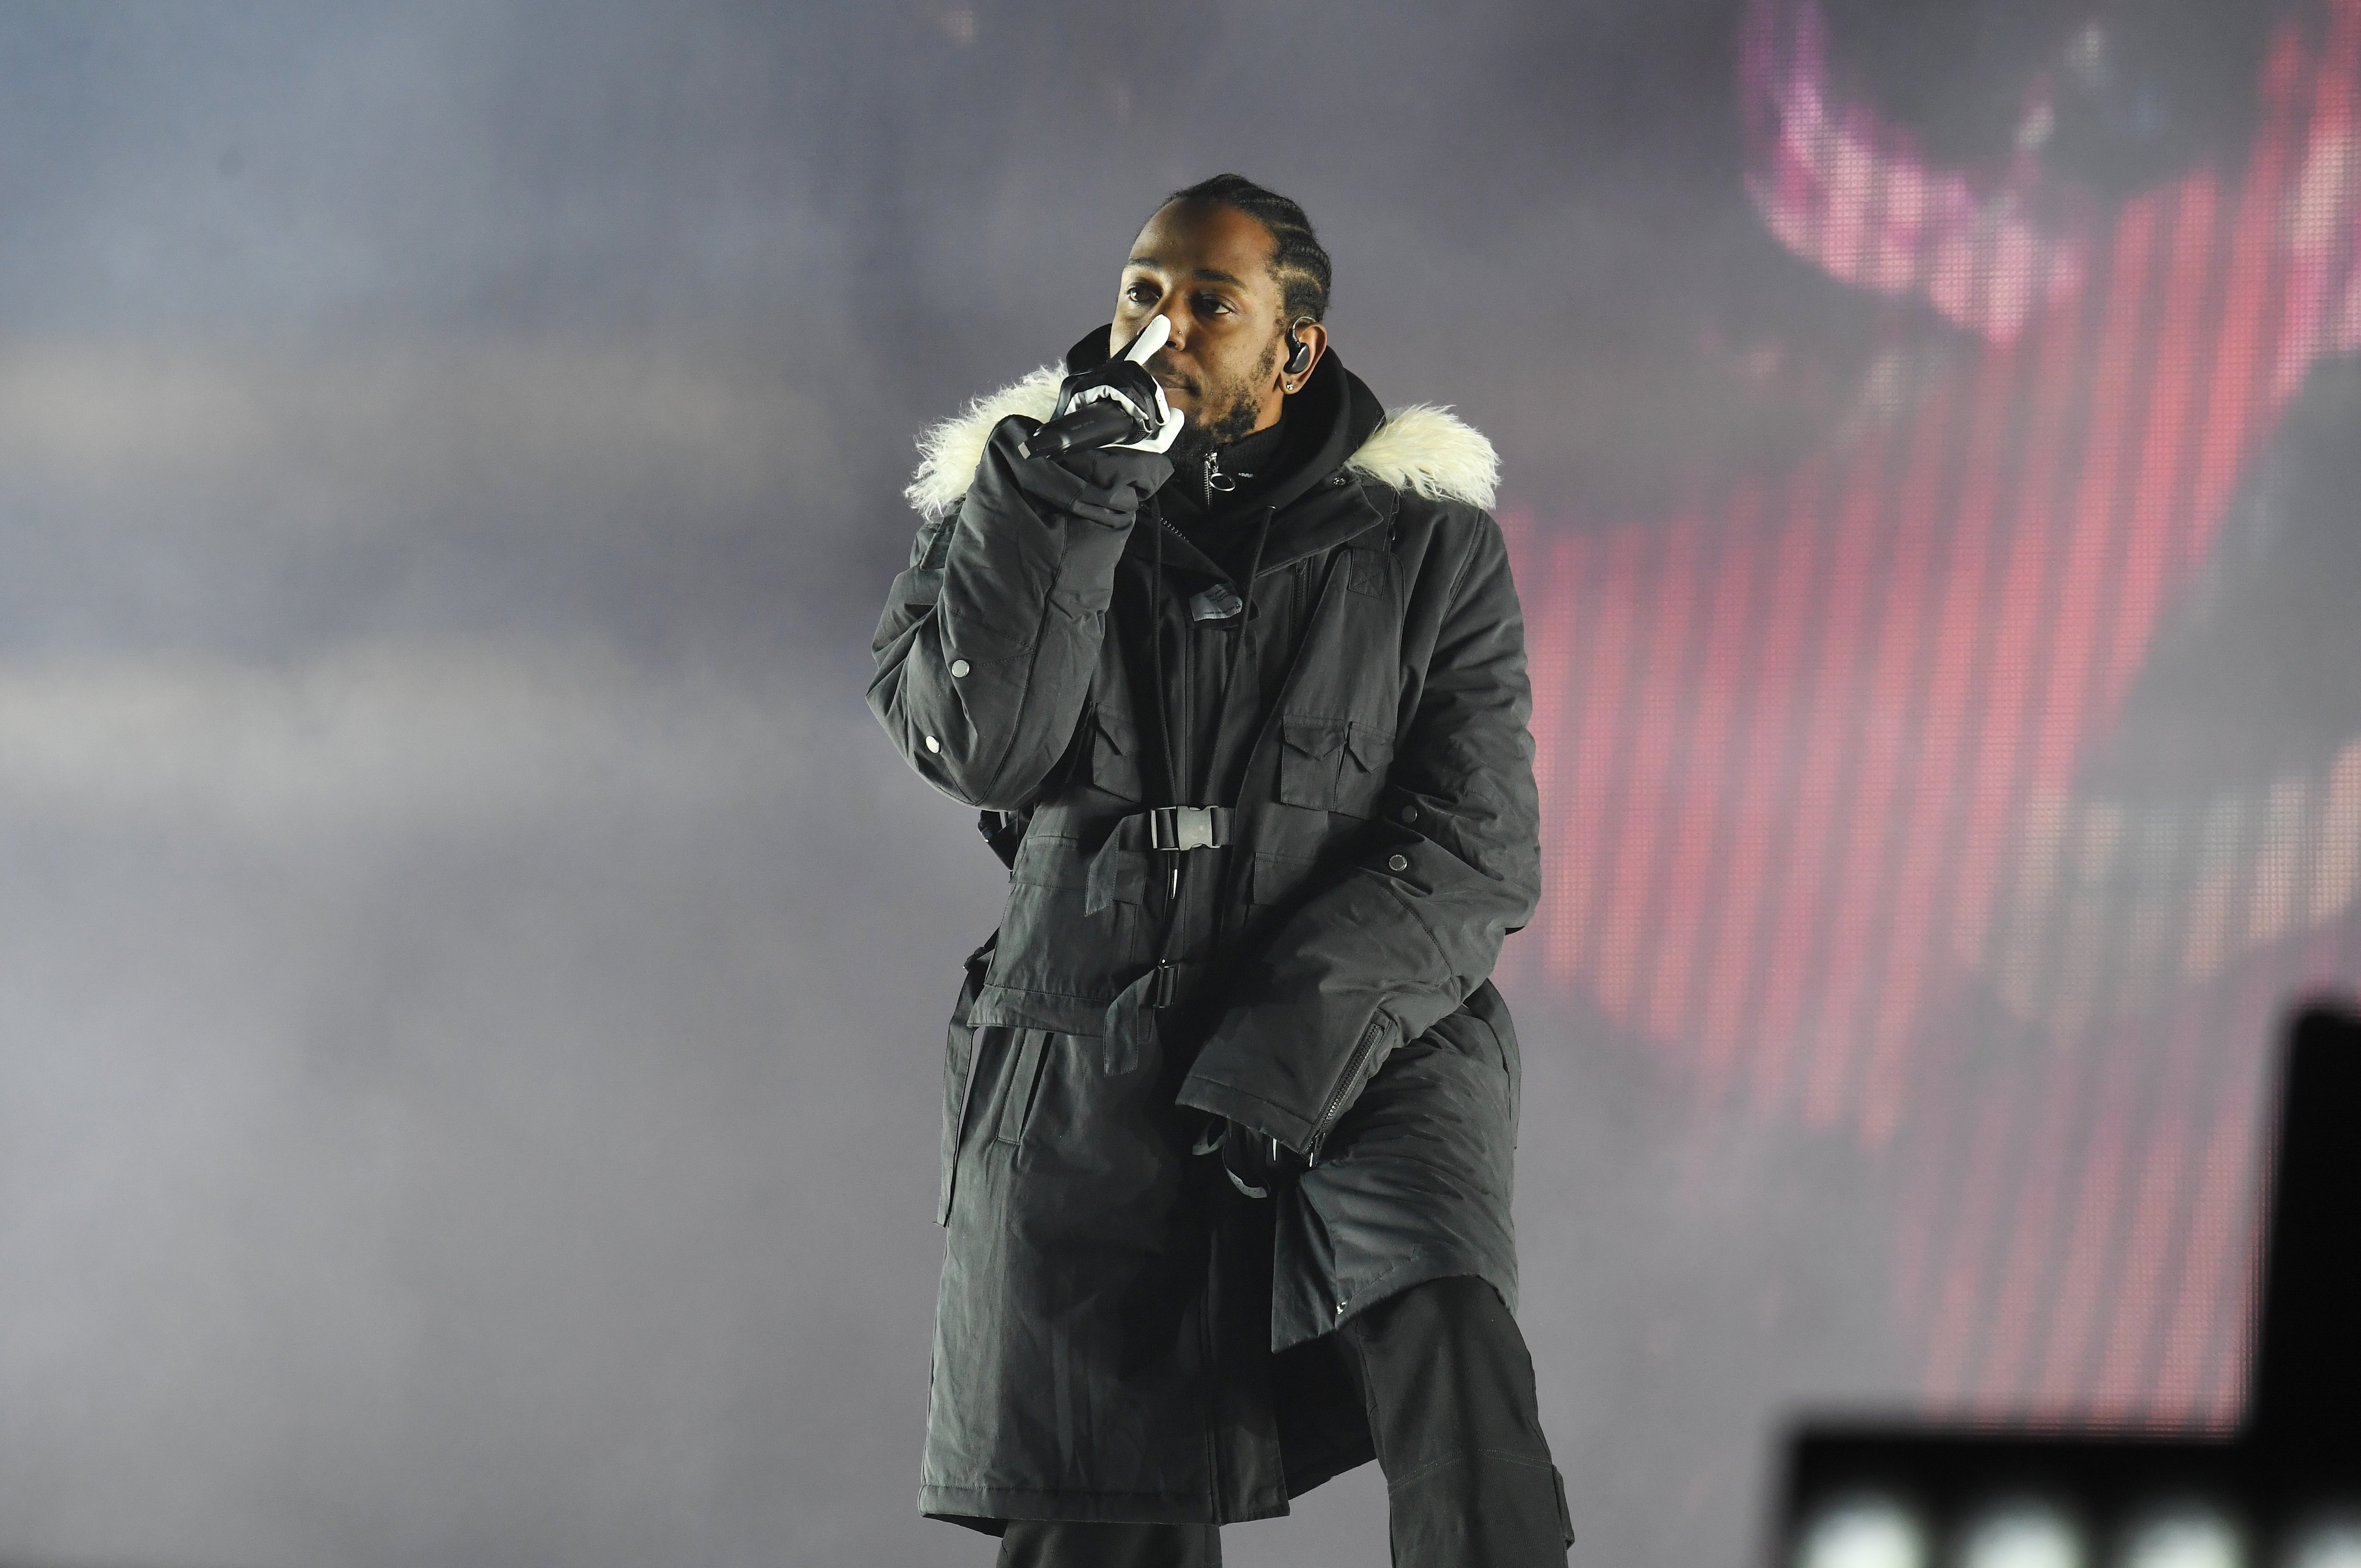 Rapper Kendrick Lamar performs during half time during 2018 College Football Playoff National Championship Game at Centennial Olympic Park on January 8, 2018 in Atlanta, Georgia. | Source: Getty Images